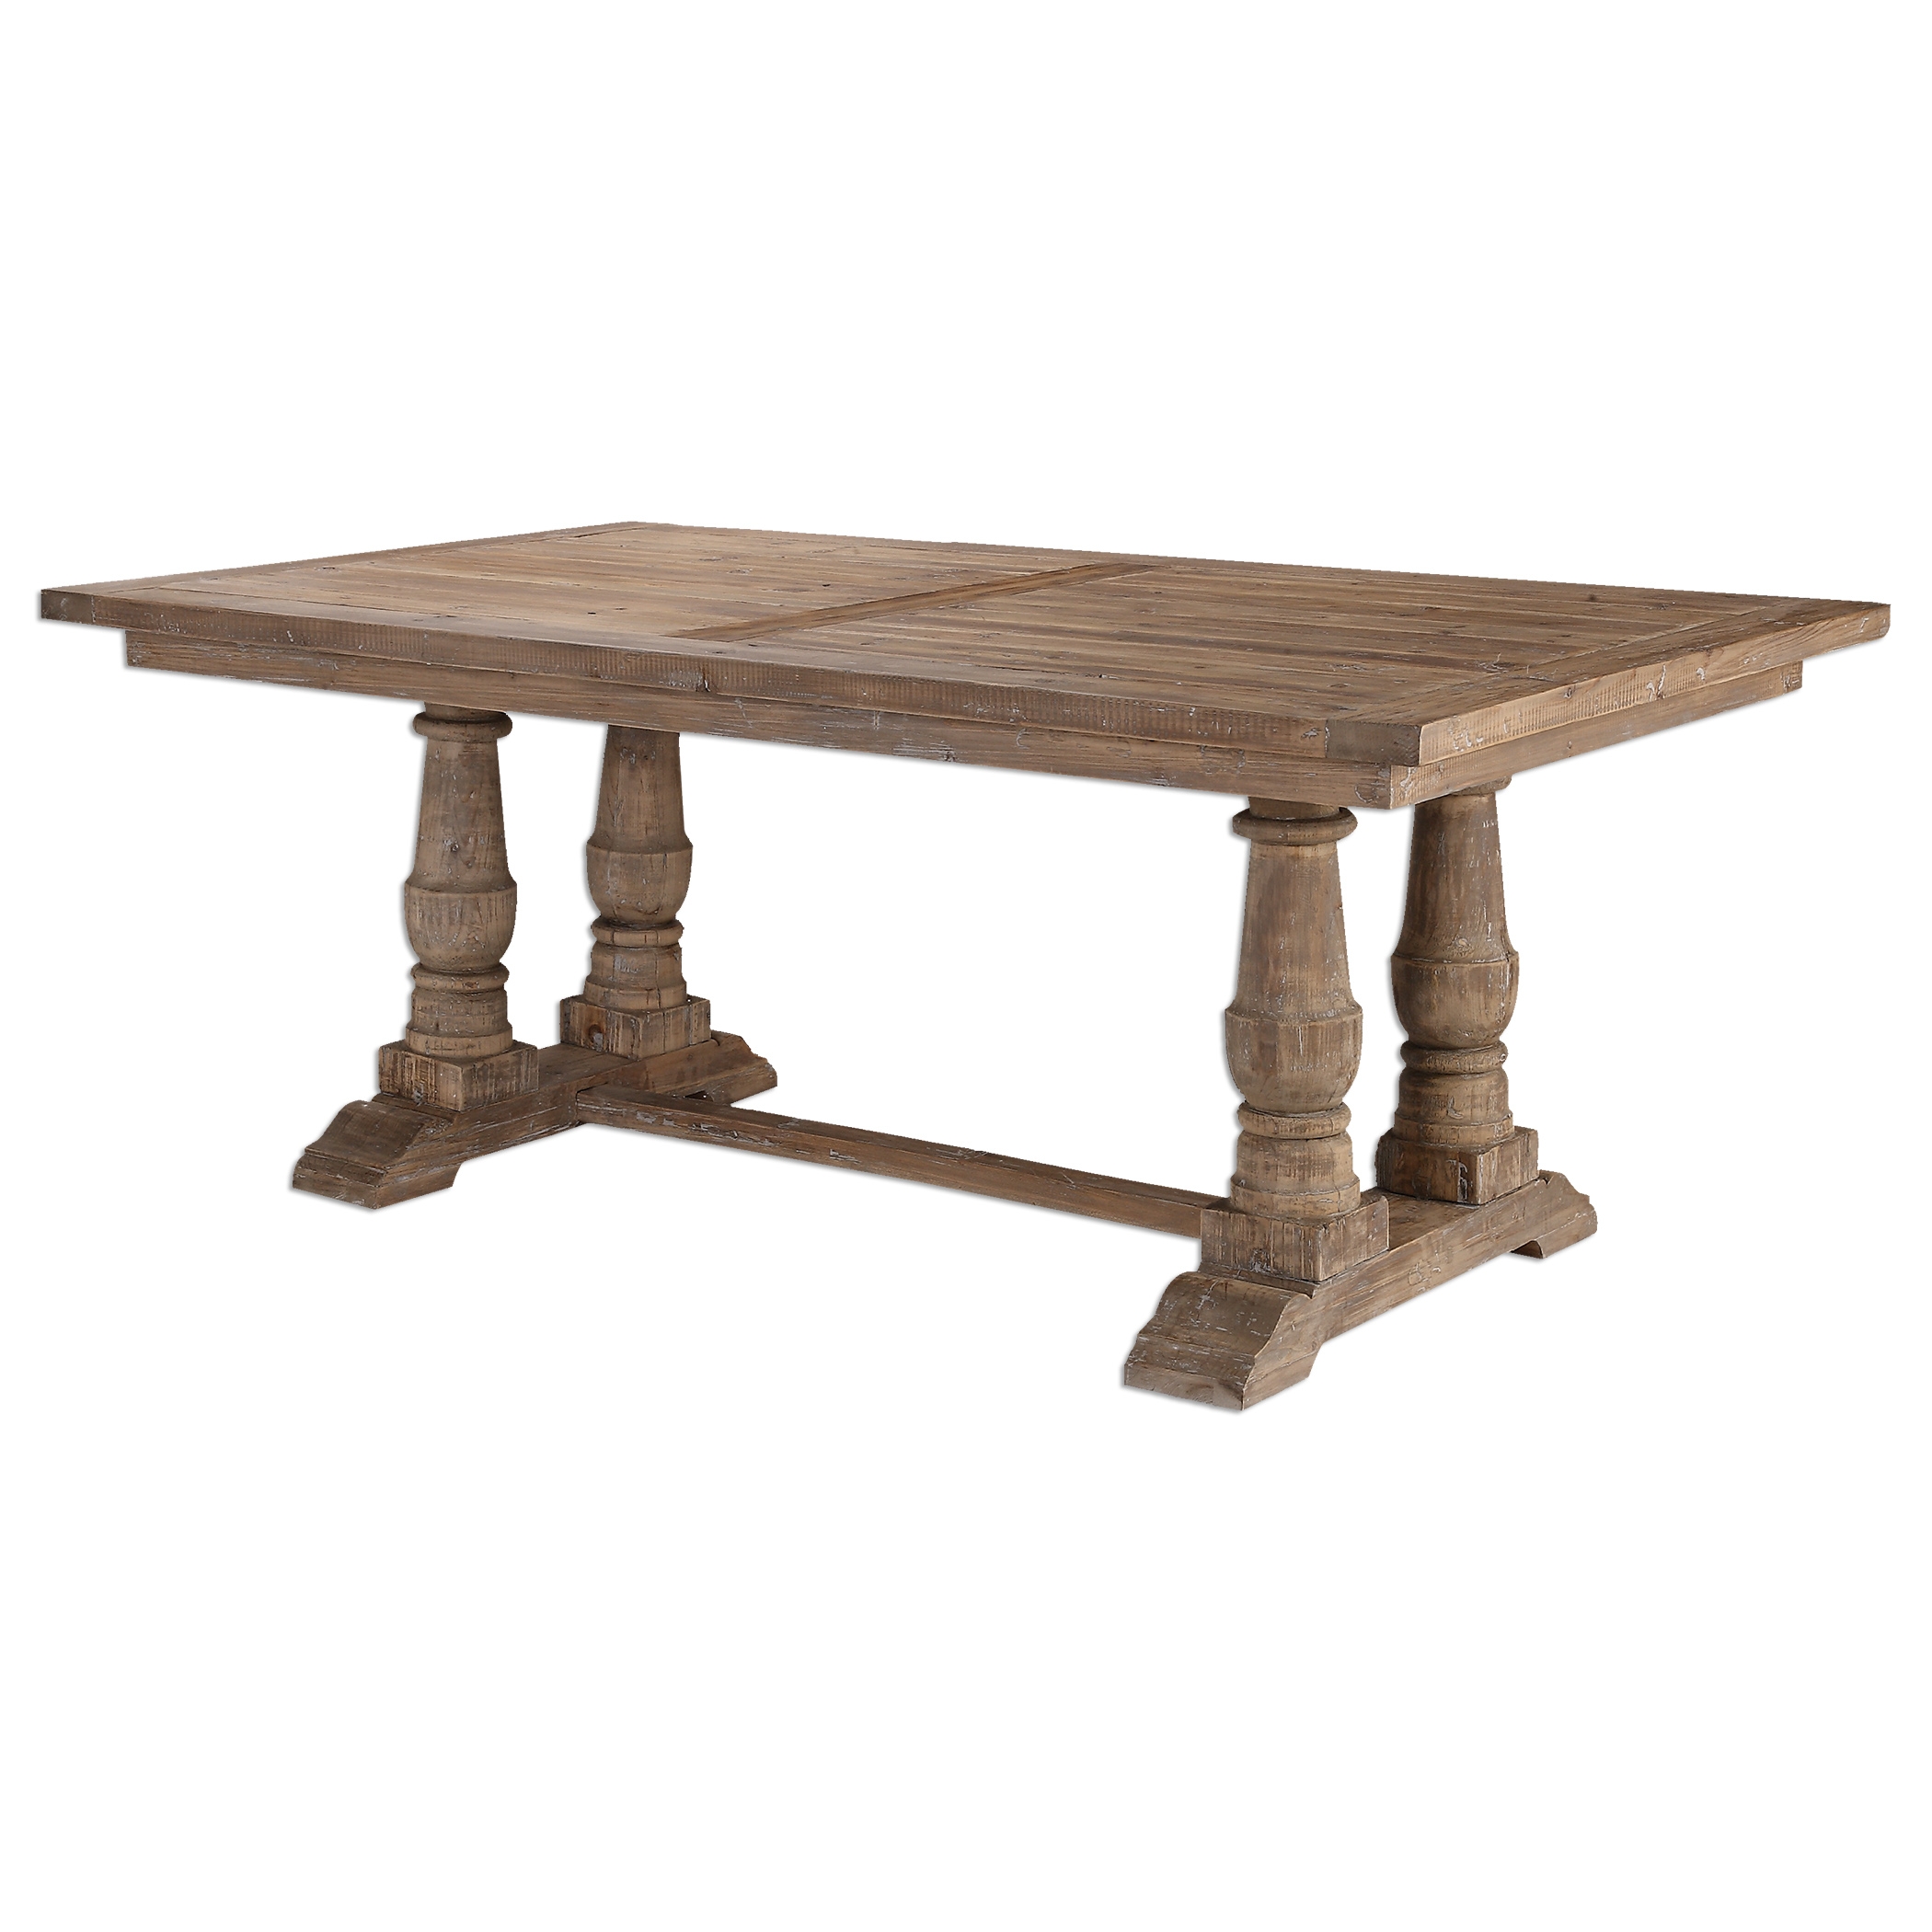 Stratford Wood Dining Table - Image 5